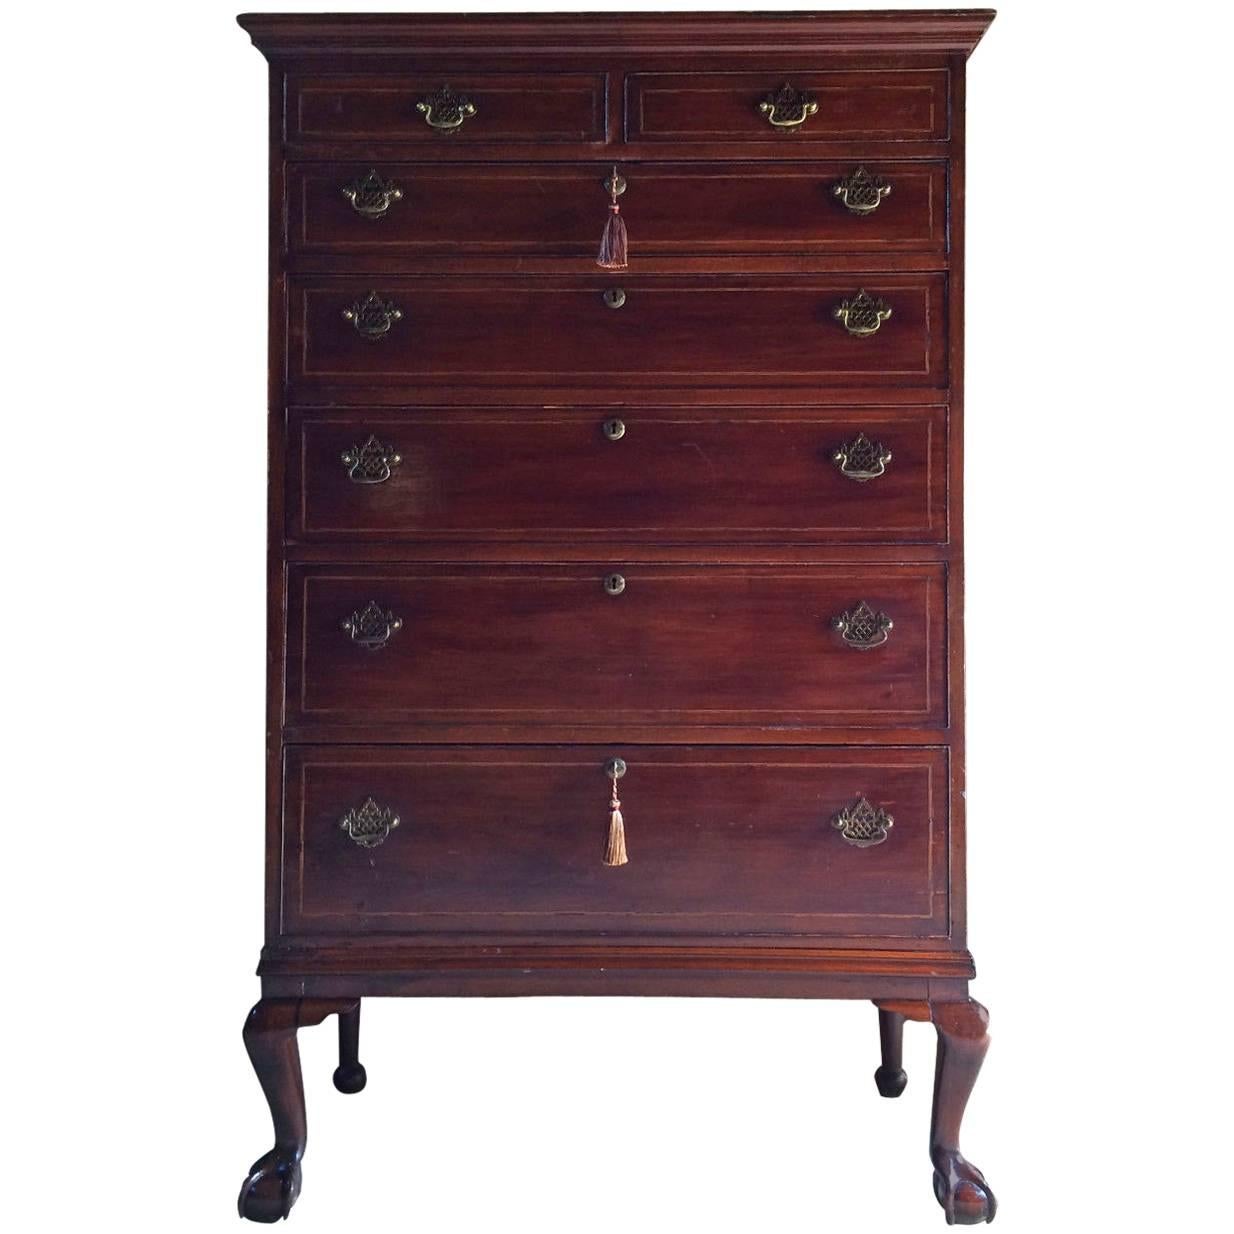 Antique Tallboy Chest of Drawers Dresser Mahogany, 19th Century Large